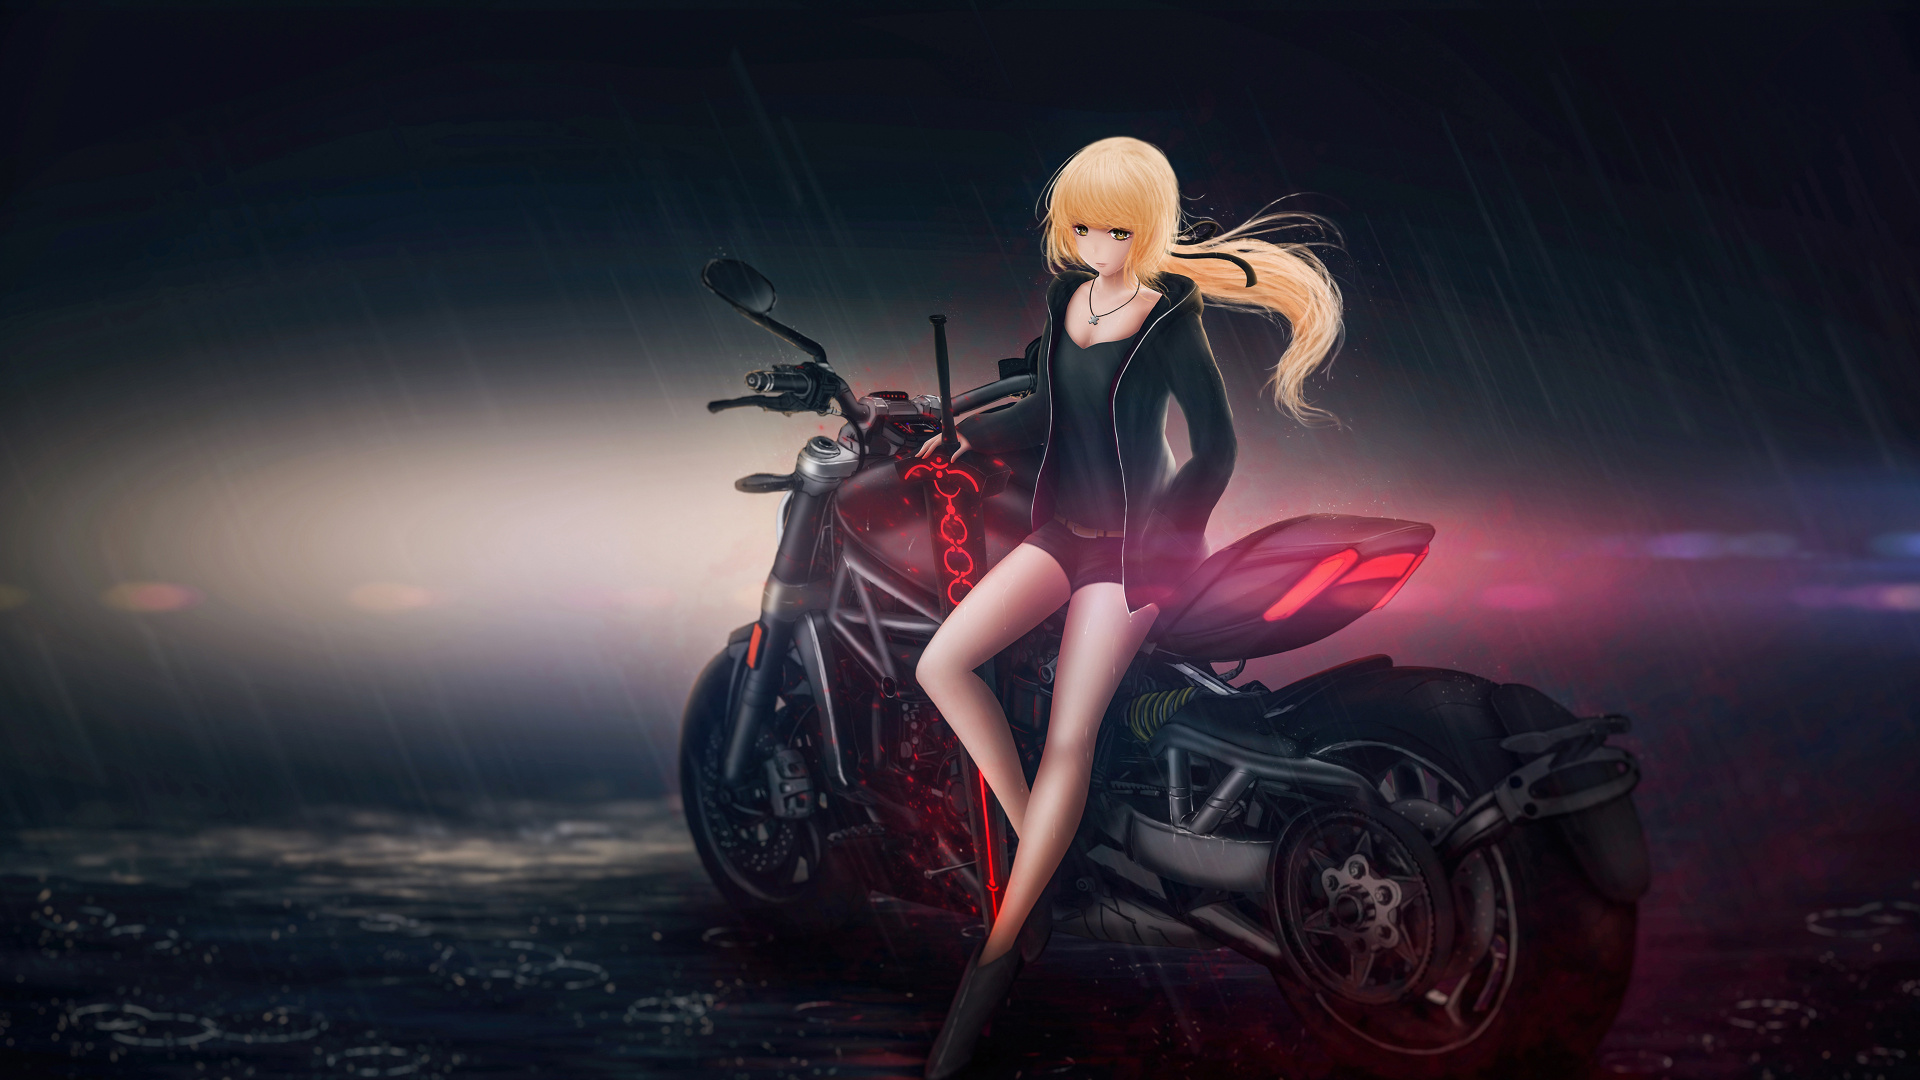 Woman in Black and Red Sports Bike Anime Character. Wallpaper in 1920x1080 Resolution